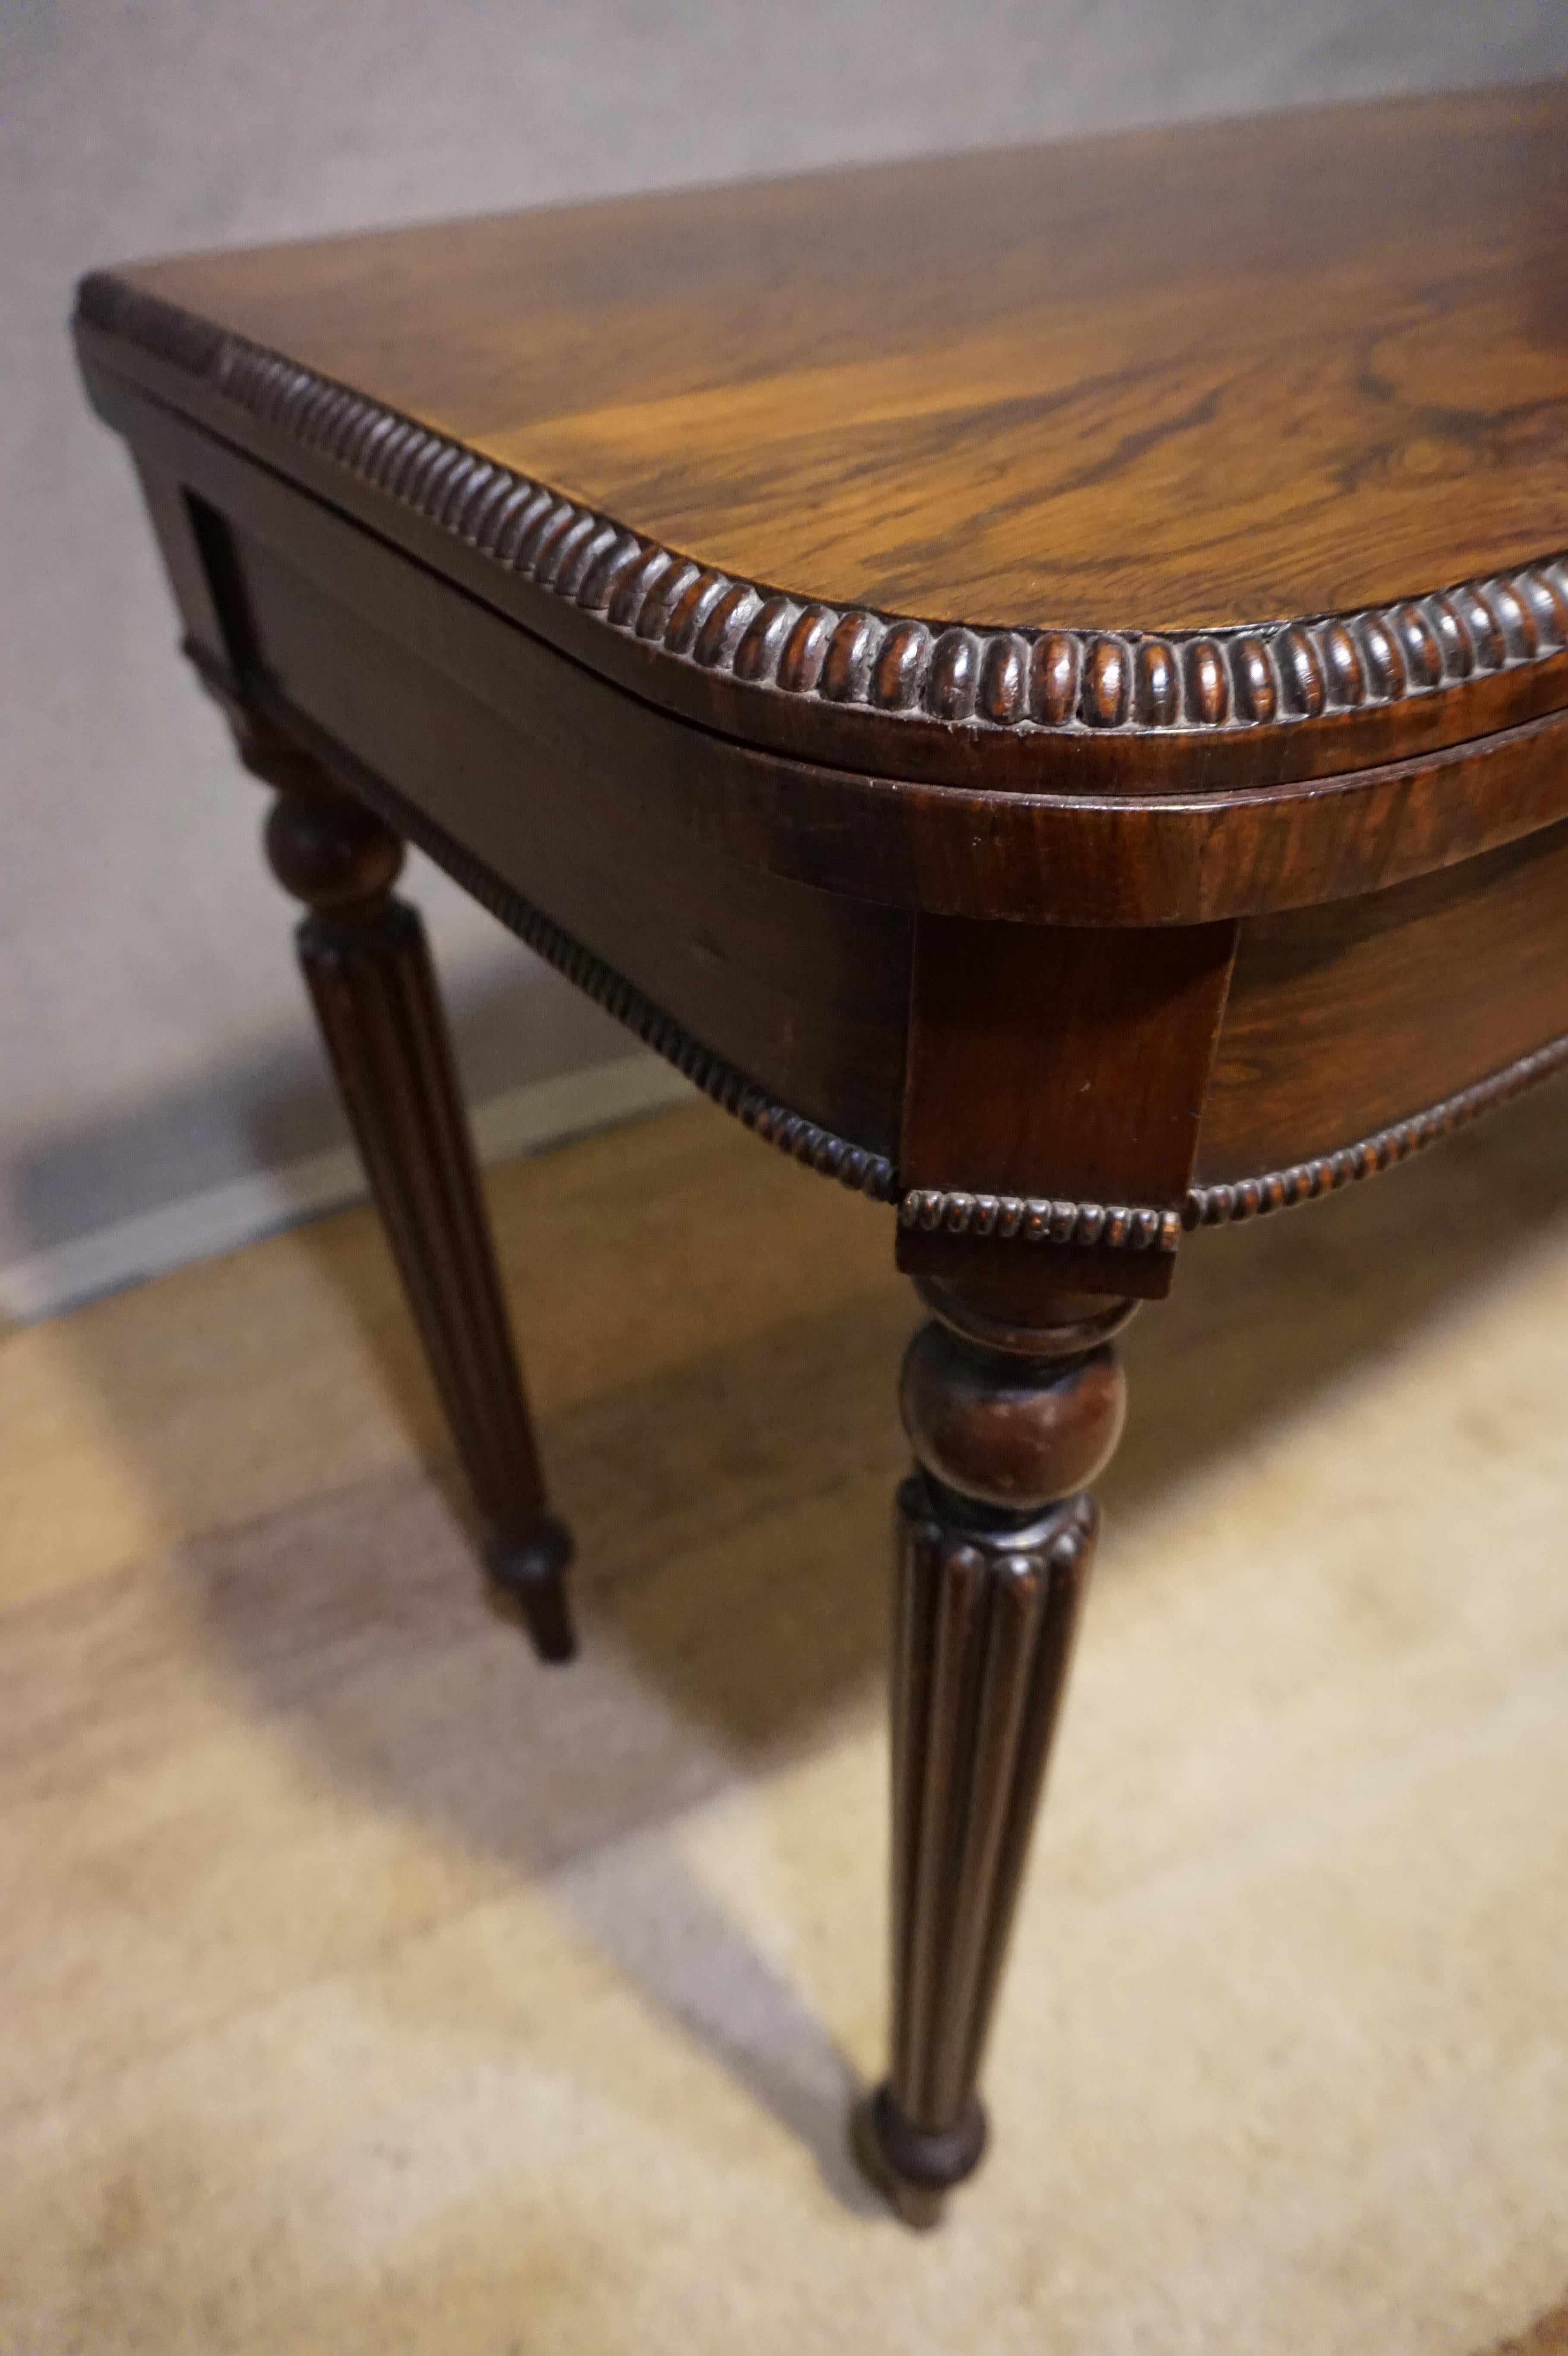 Victorian Rosewood Games Table with Carved Legs and Beaded Edge In Good Condition For Sale In Vancouver, British Columbia